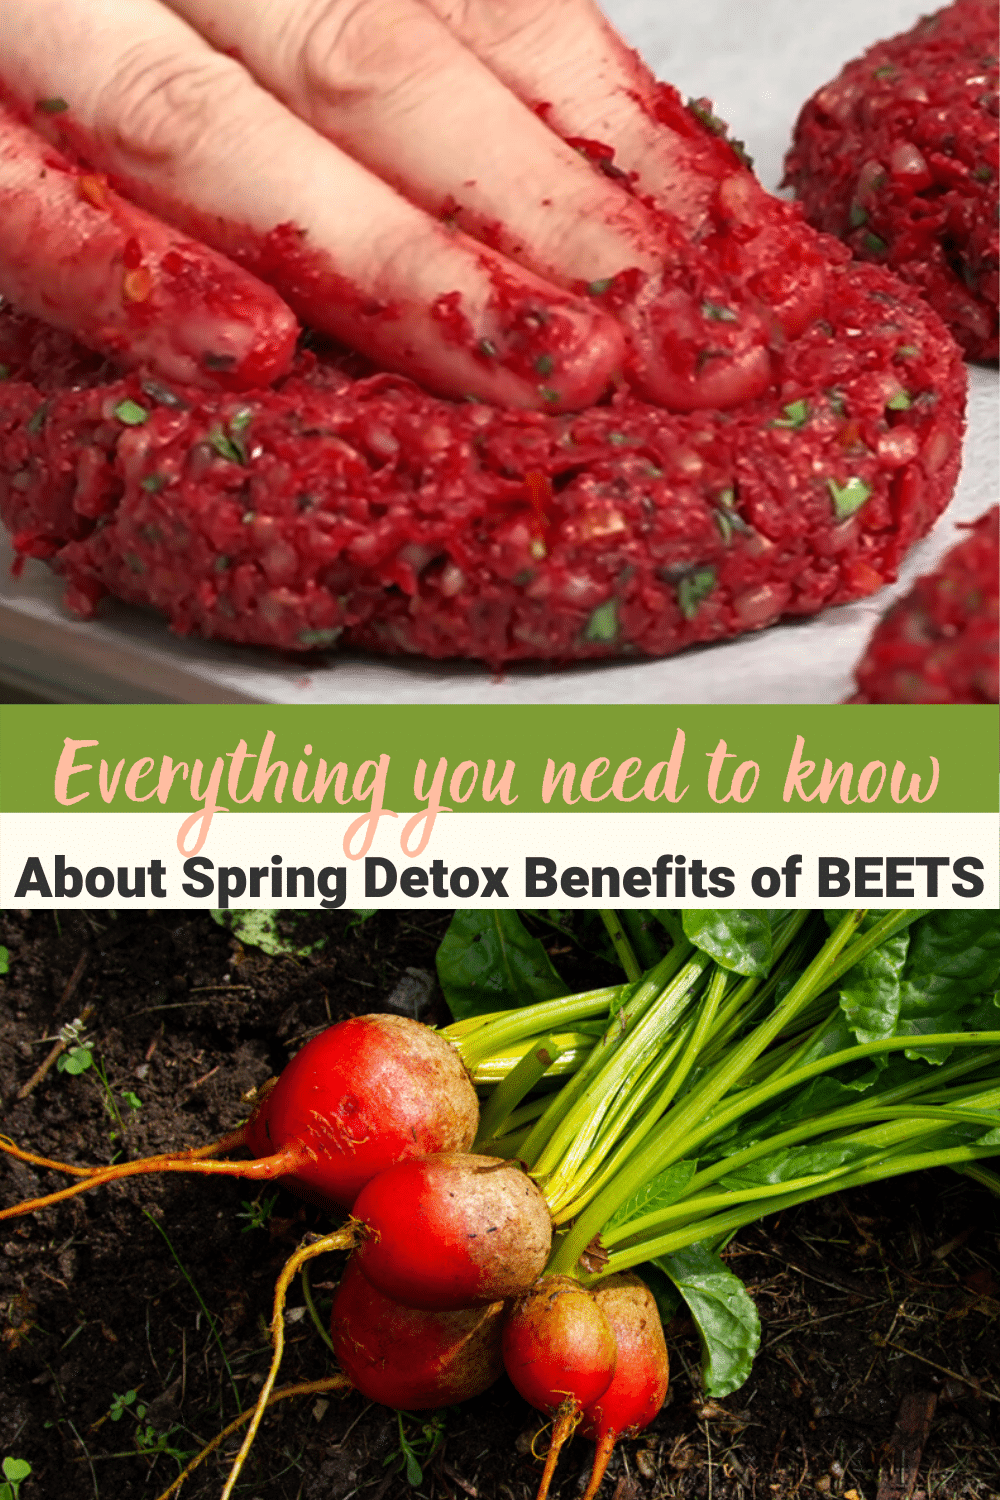 Beets: Your Natural Spring Detox Ally